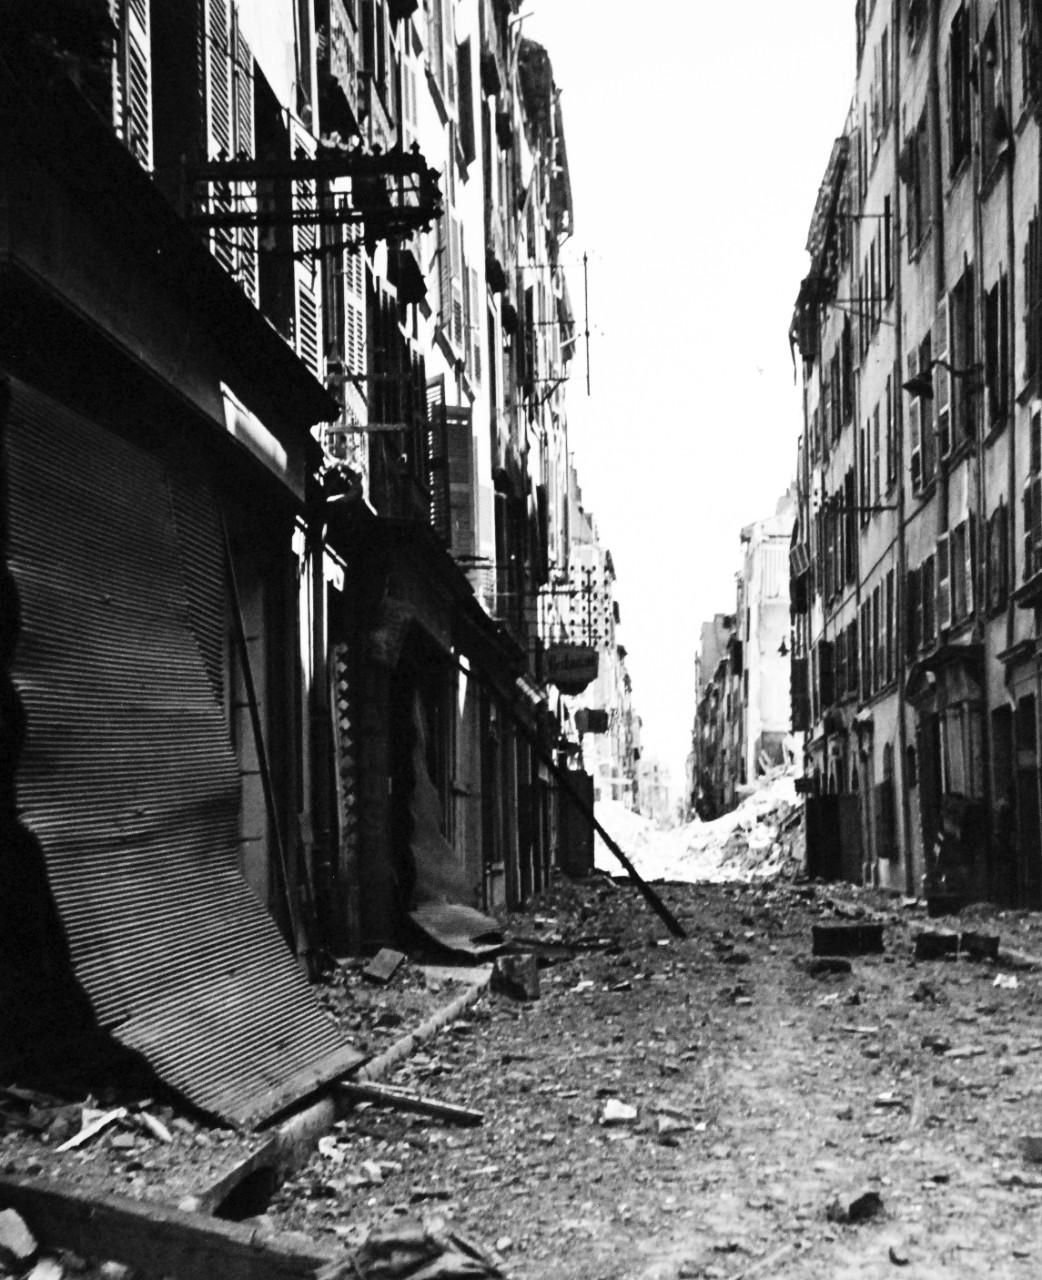 80-G-394114:   Invasion of Southern France, August 1944.   Battle damage in Toulon, France, probably photographed in September 1944.   Photograph released on 12 July 1948.   Official U.S. Navy Photograph, now in the collections of the National Archives.   (2014/9/16). 